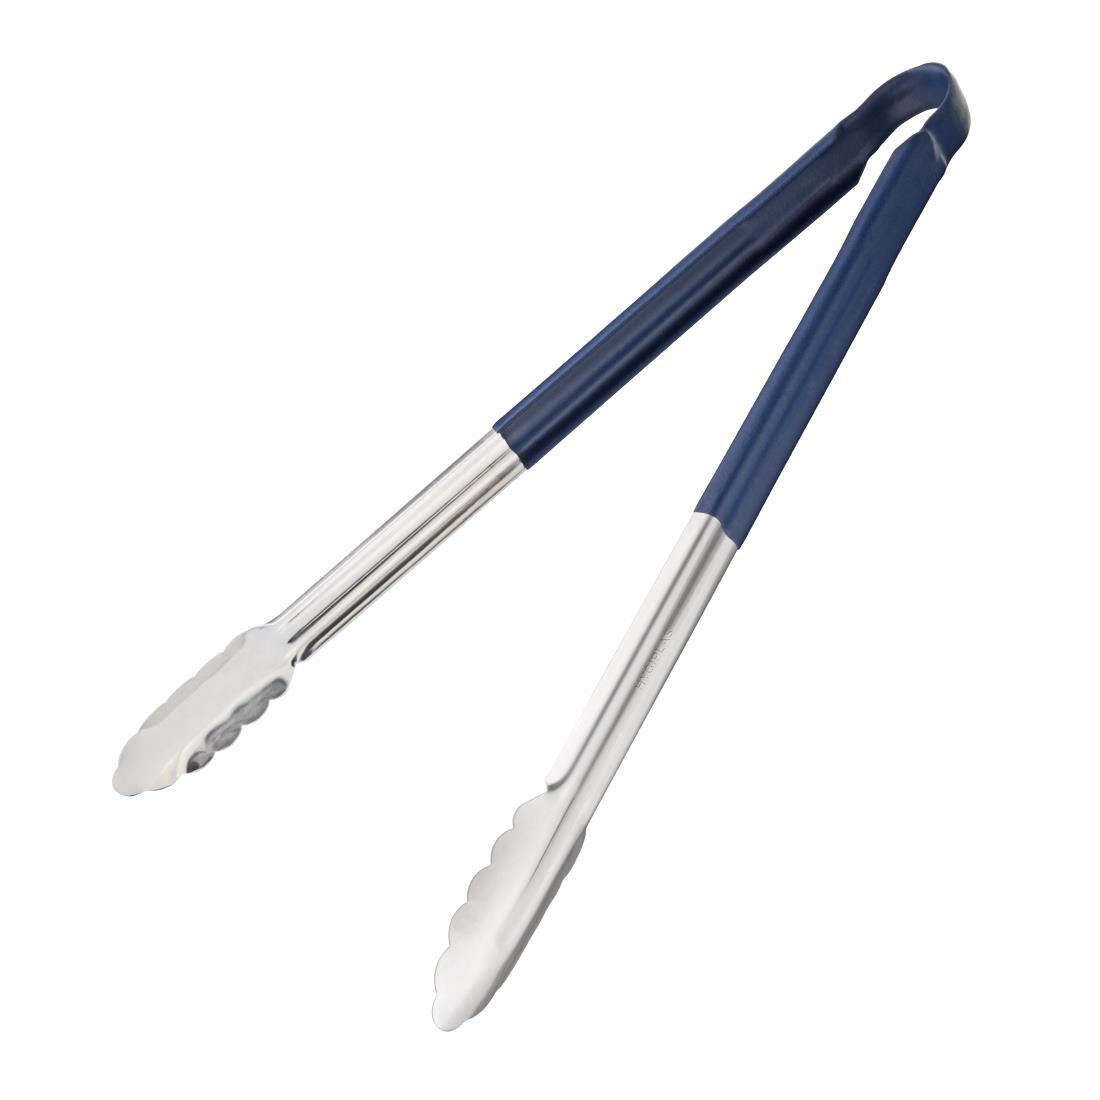 Hygiplas Colour Coded Serving Tong Blue 405mm - HC849  - 1